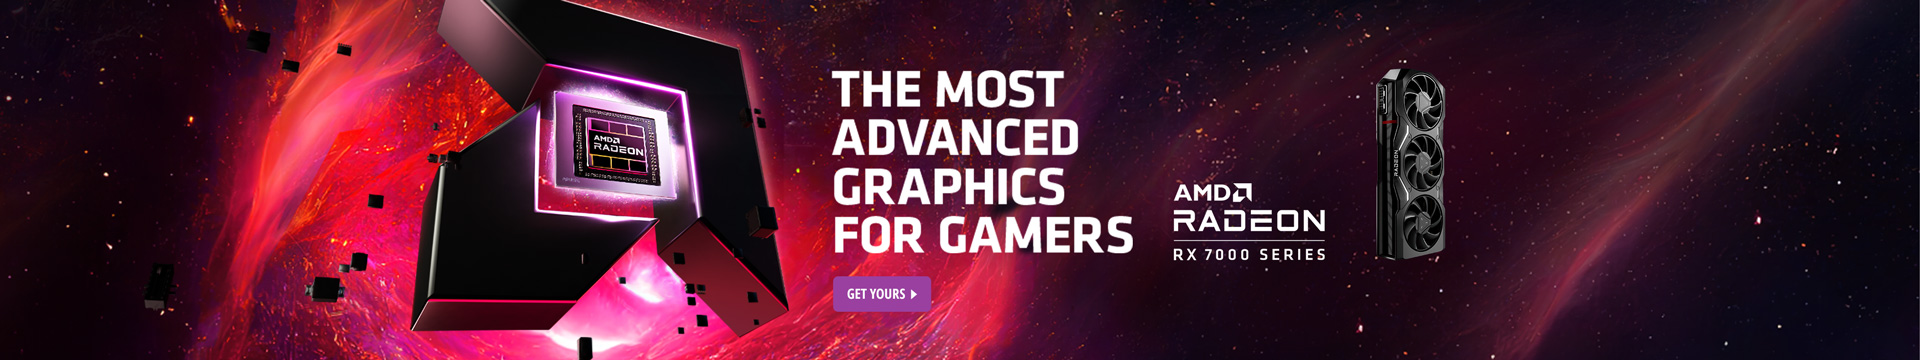 The Most Advanced Graphics for Gamers